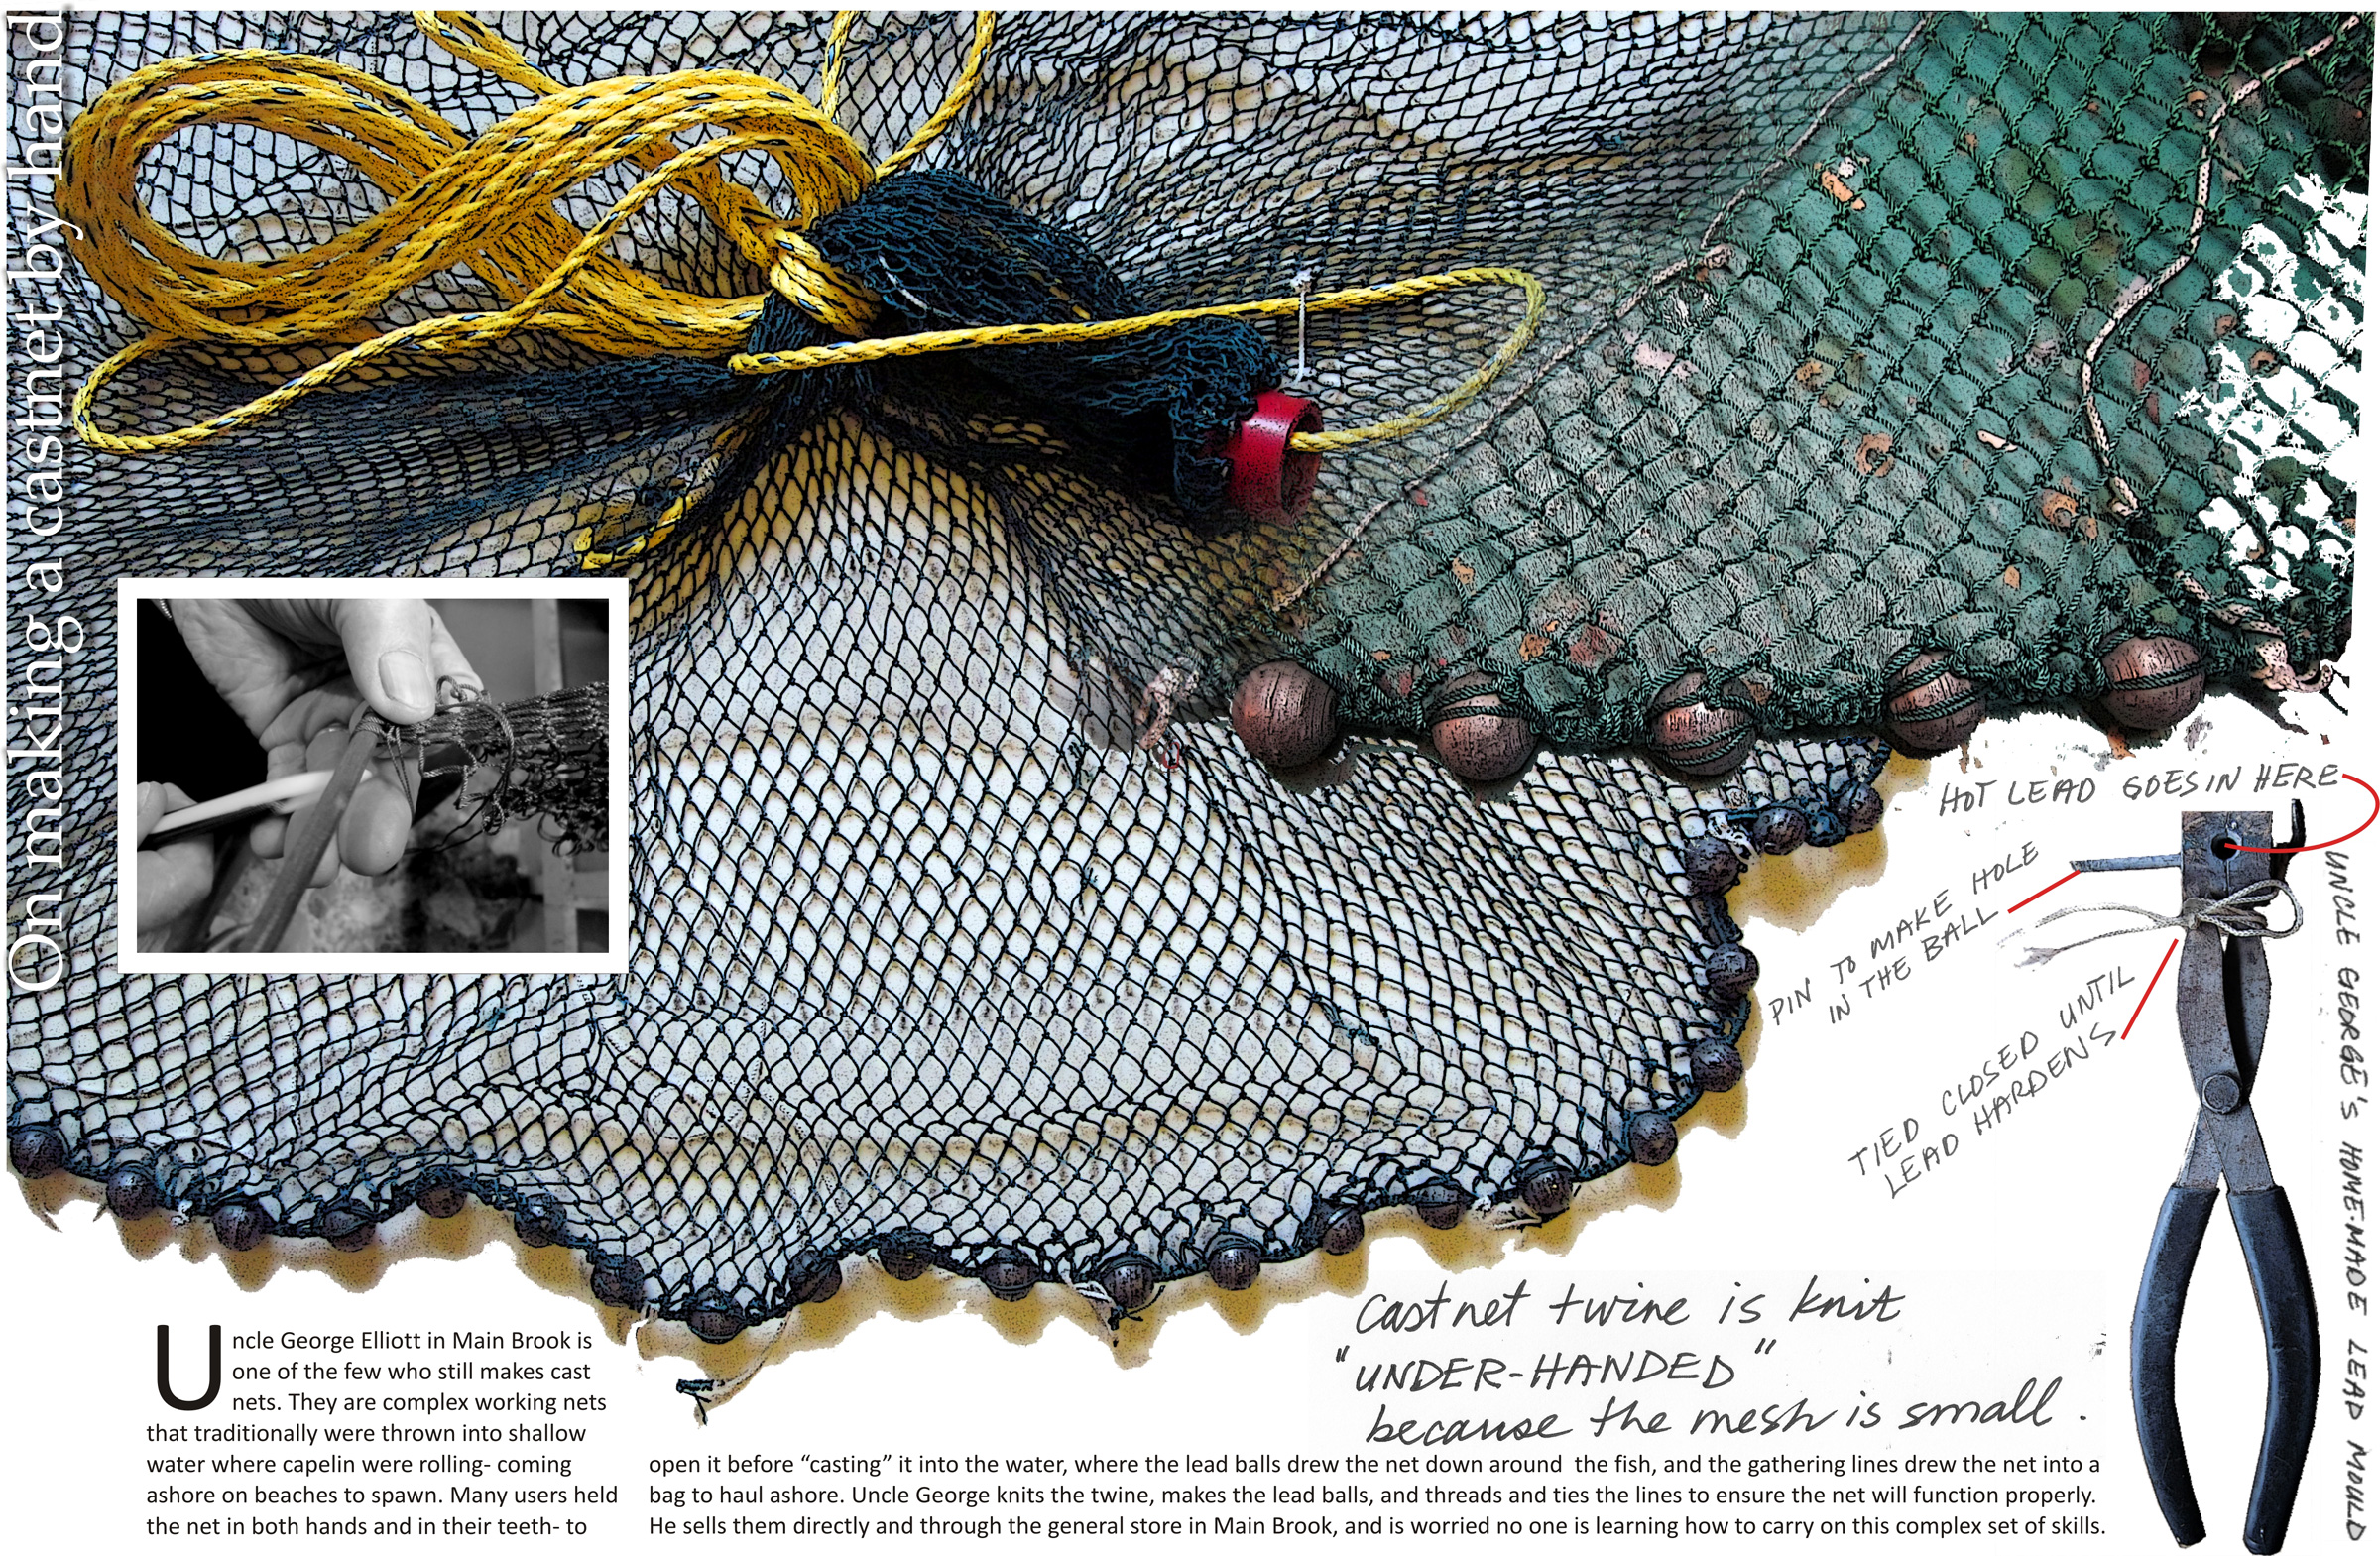 On making a castnet by hand › Towards an Encyclopedia of Local Knowledge